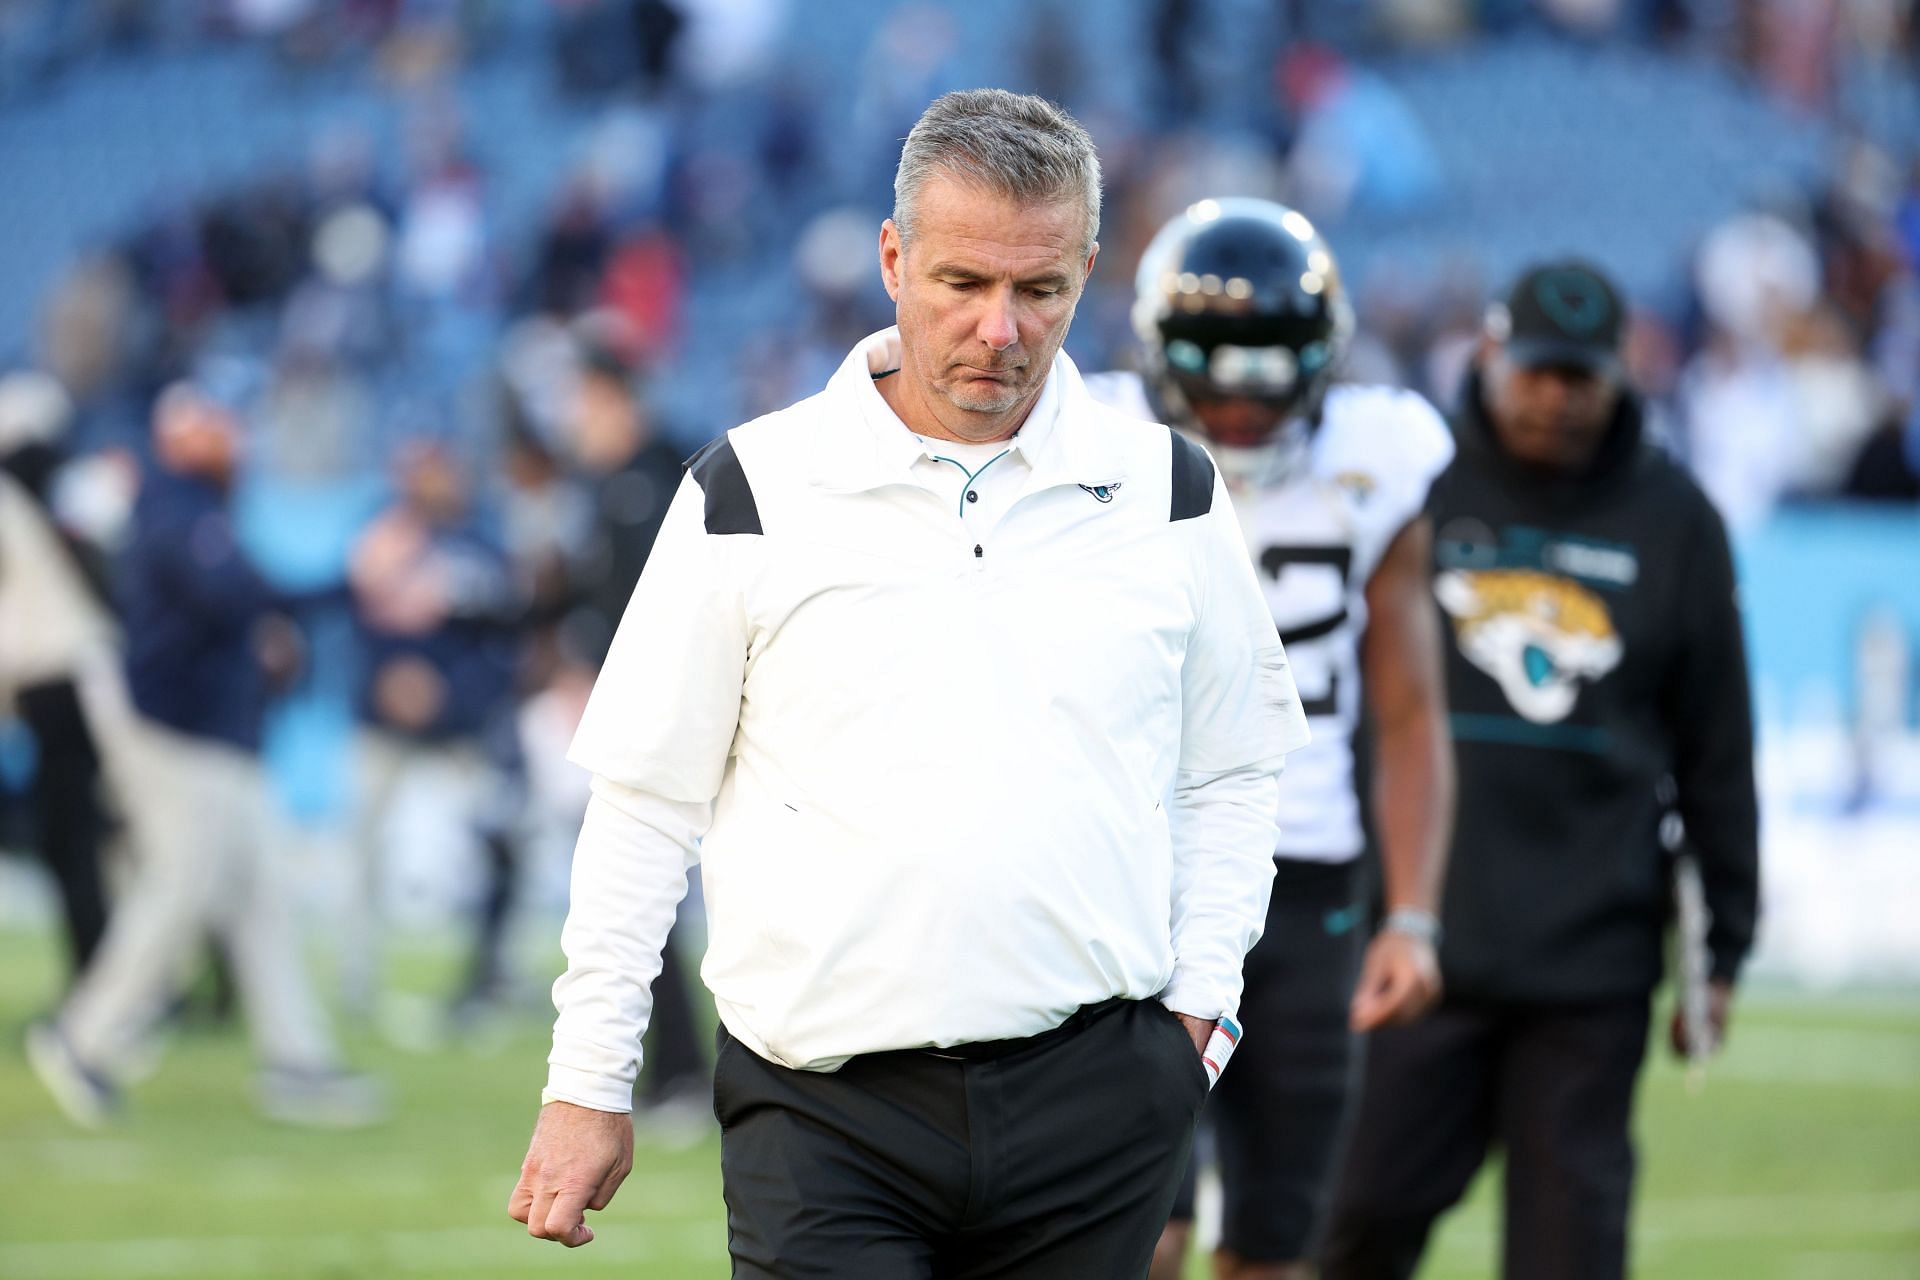 Jacksonville Jaguars head coach Urban Meyer after defeat to the Titans